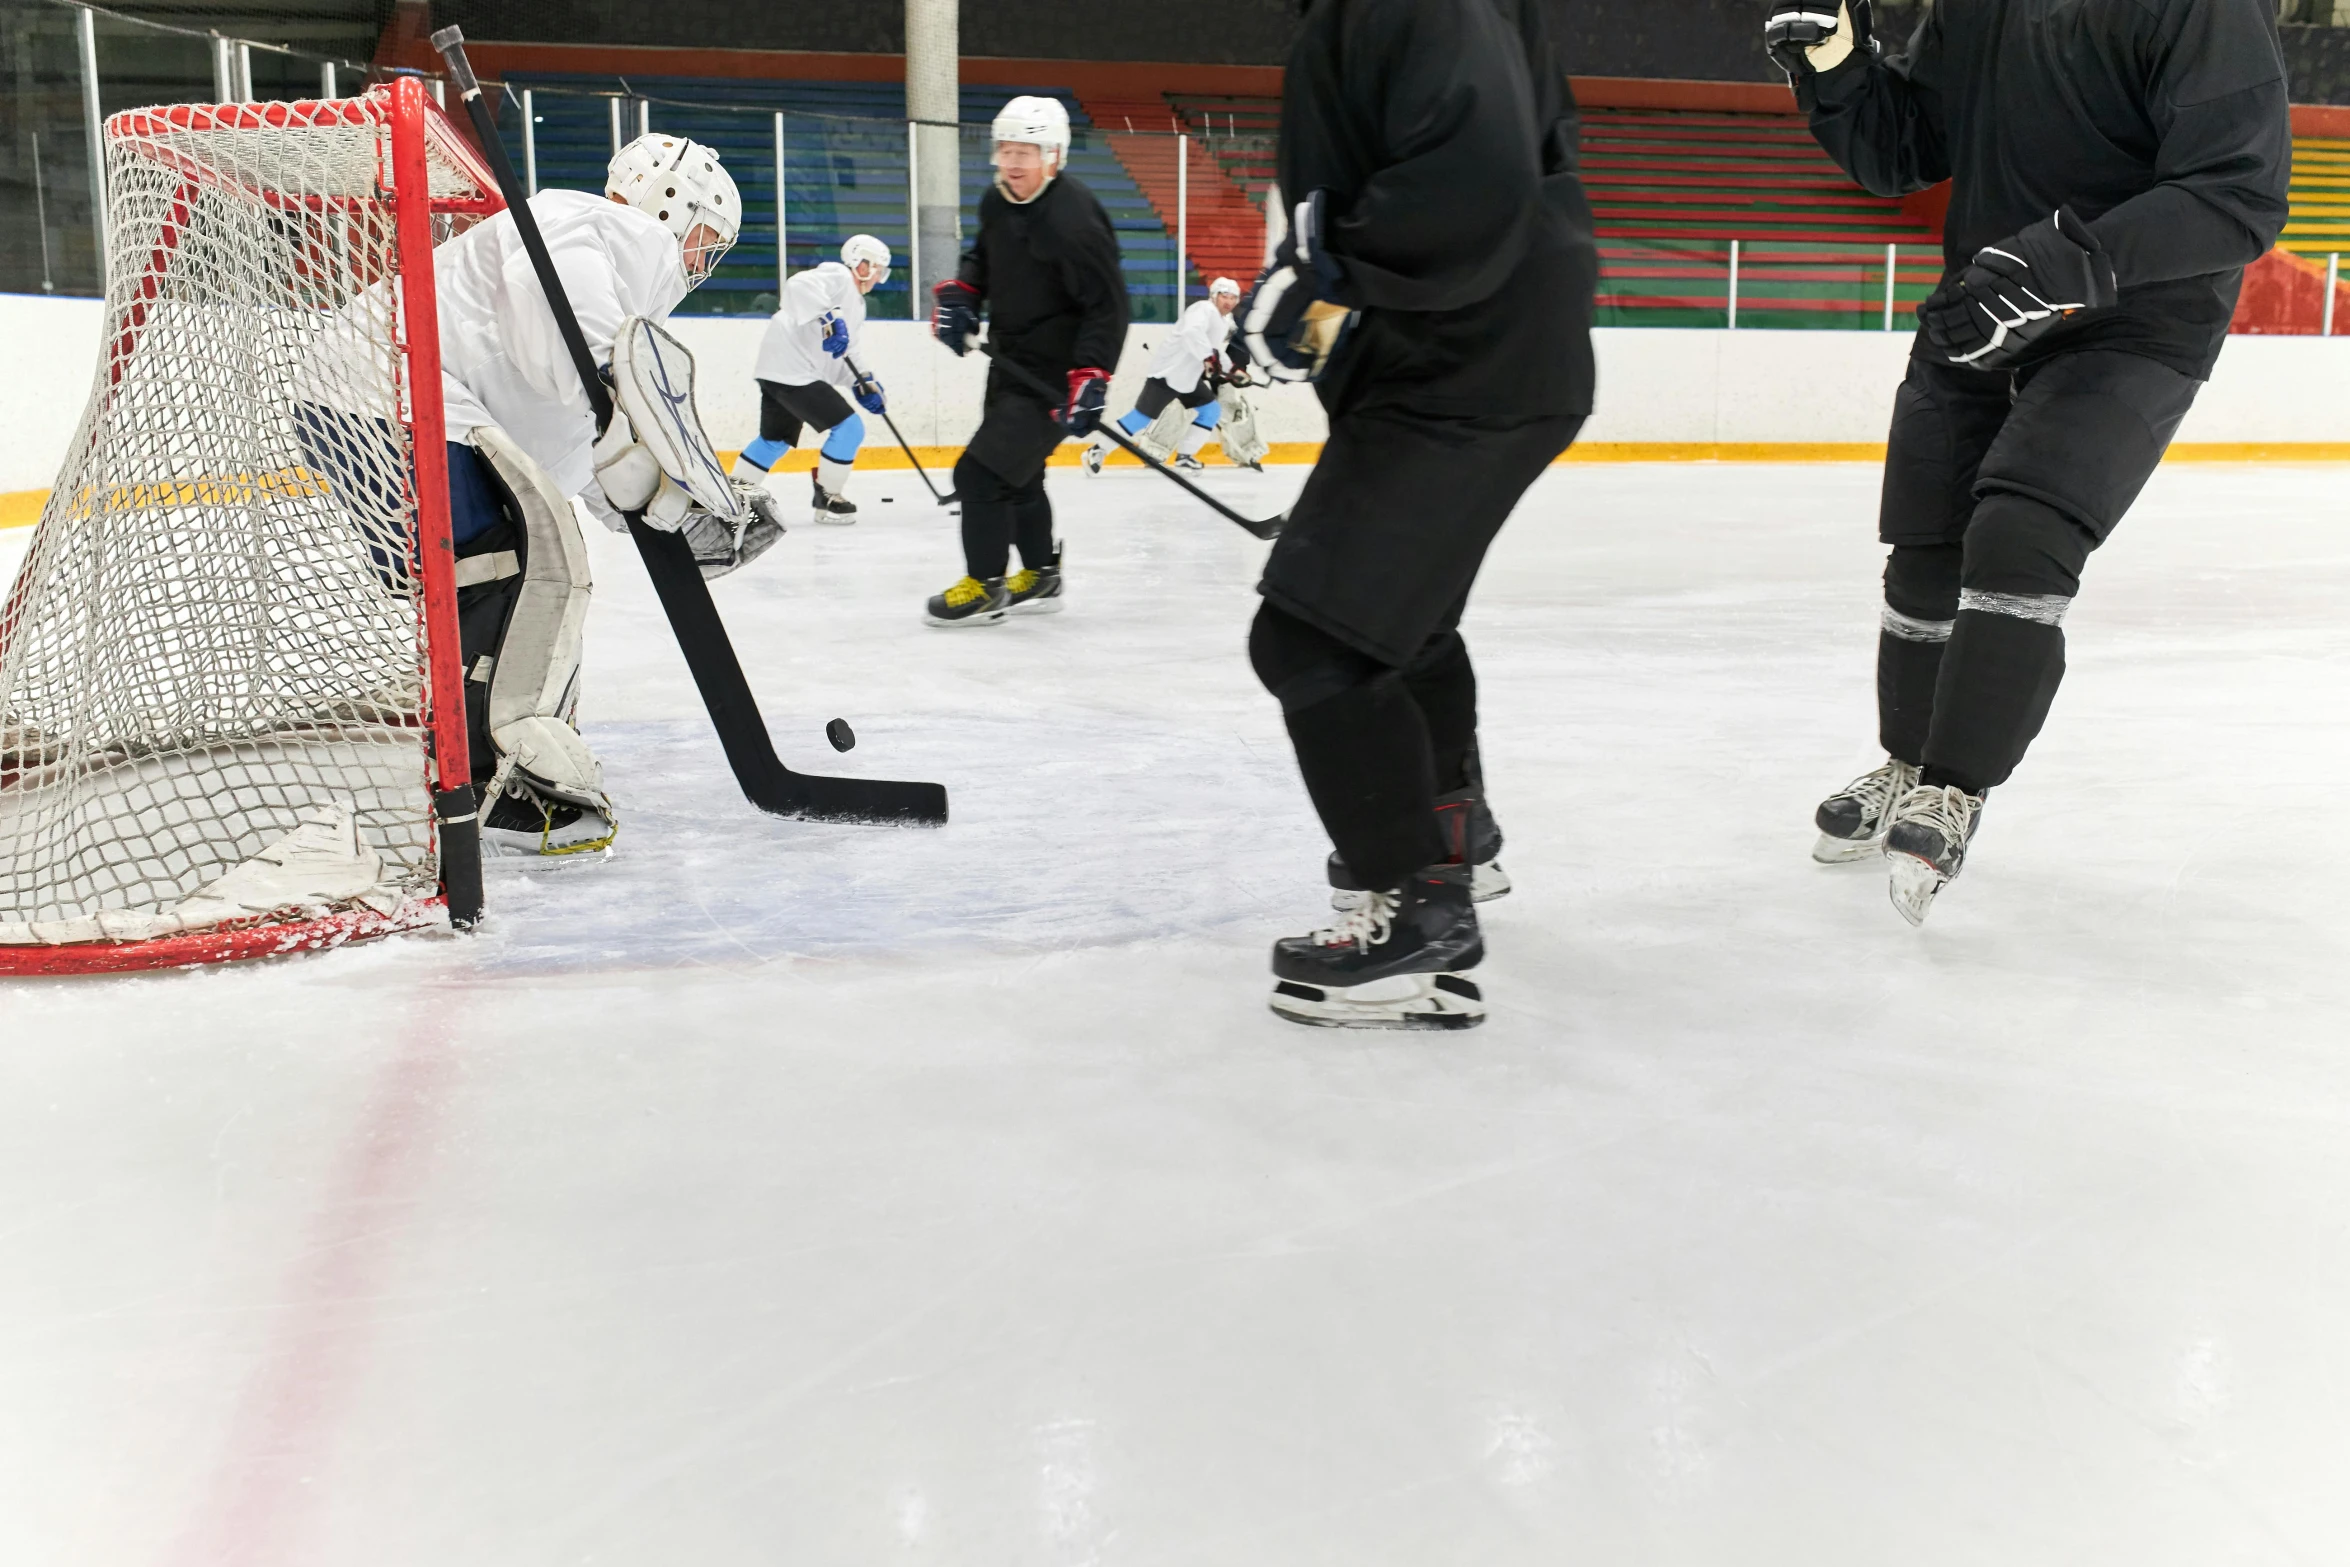 a group of people playing a game of hockey, training, full ice hockey goalie gear, thumbnail, leg and hip shot